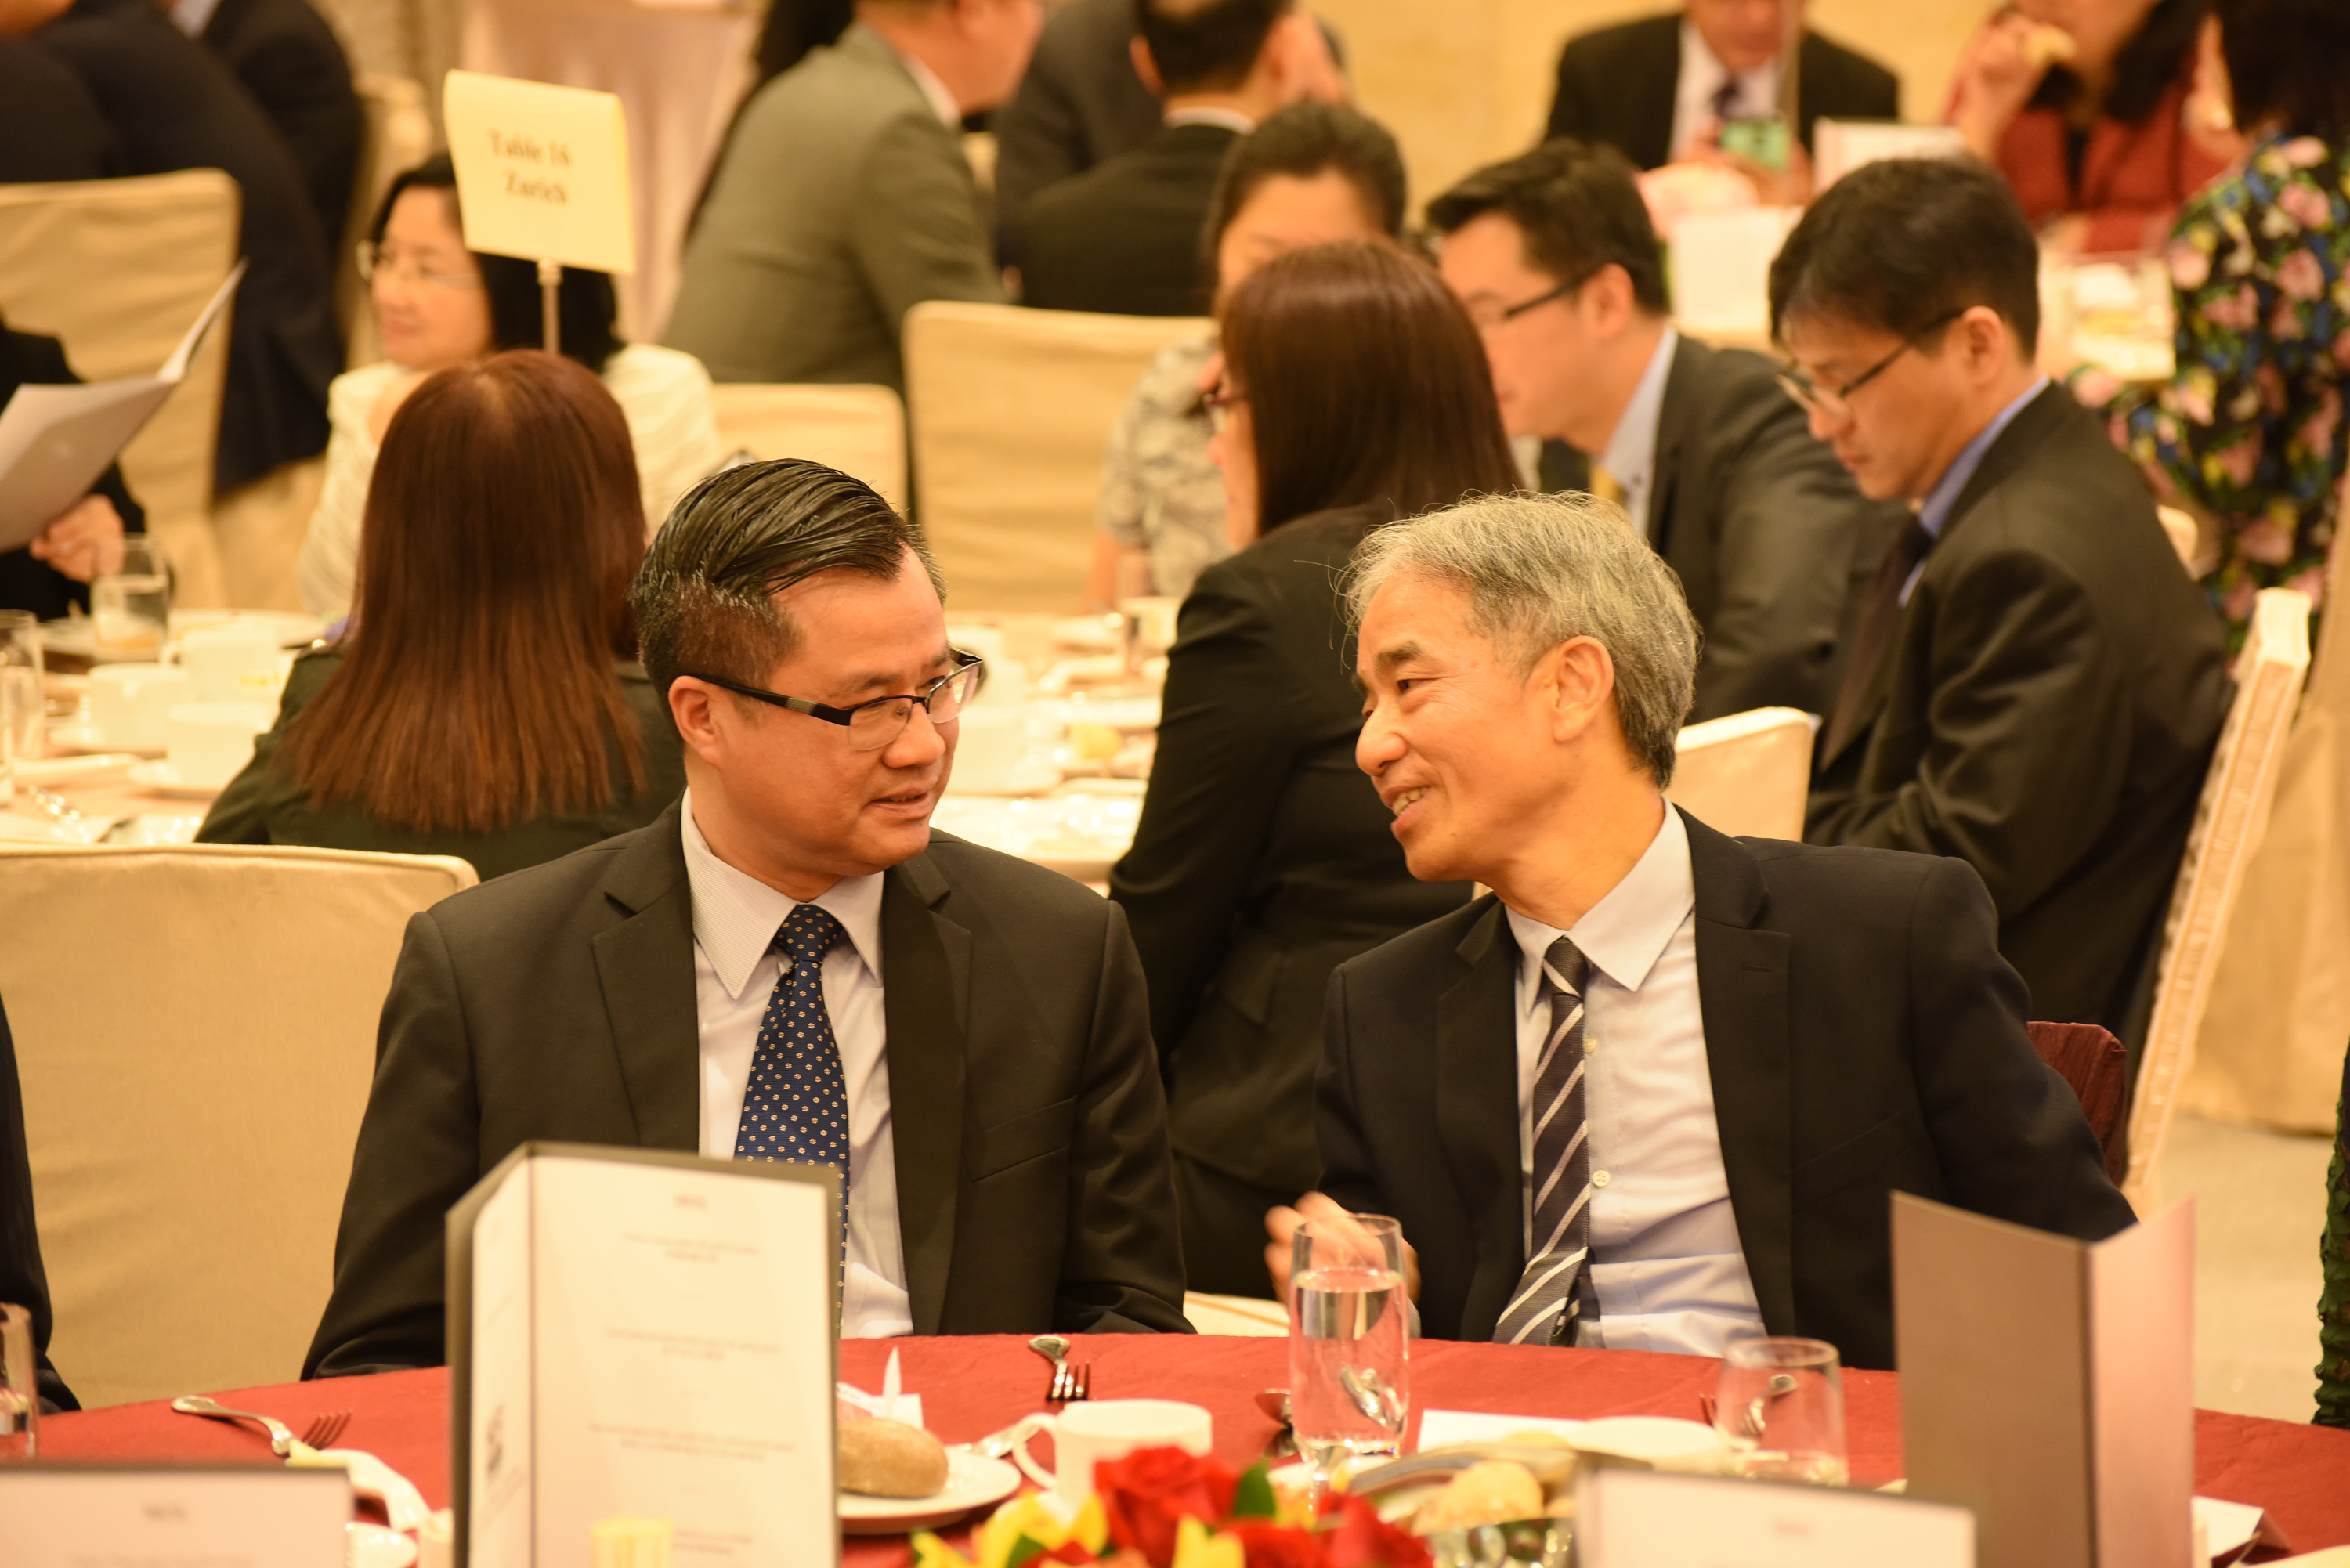 Lunch Talk by IIA Chairman Dr Moses Cheng - “Insurance in new economy: scaling new heights with IIA”